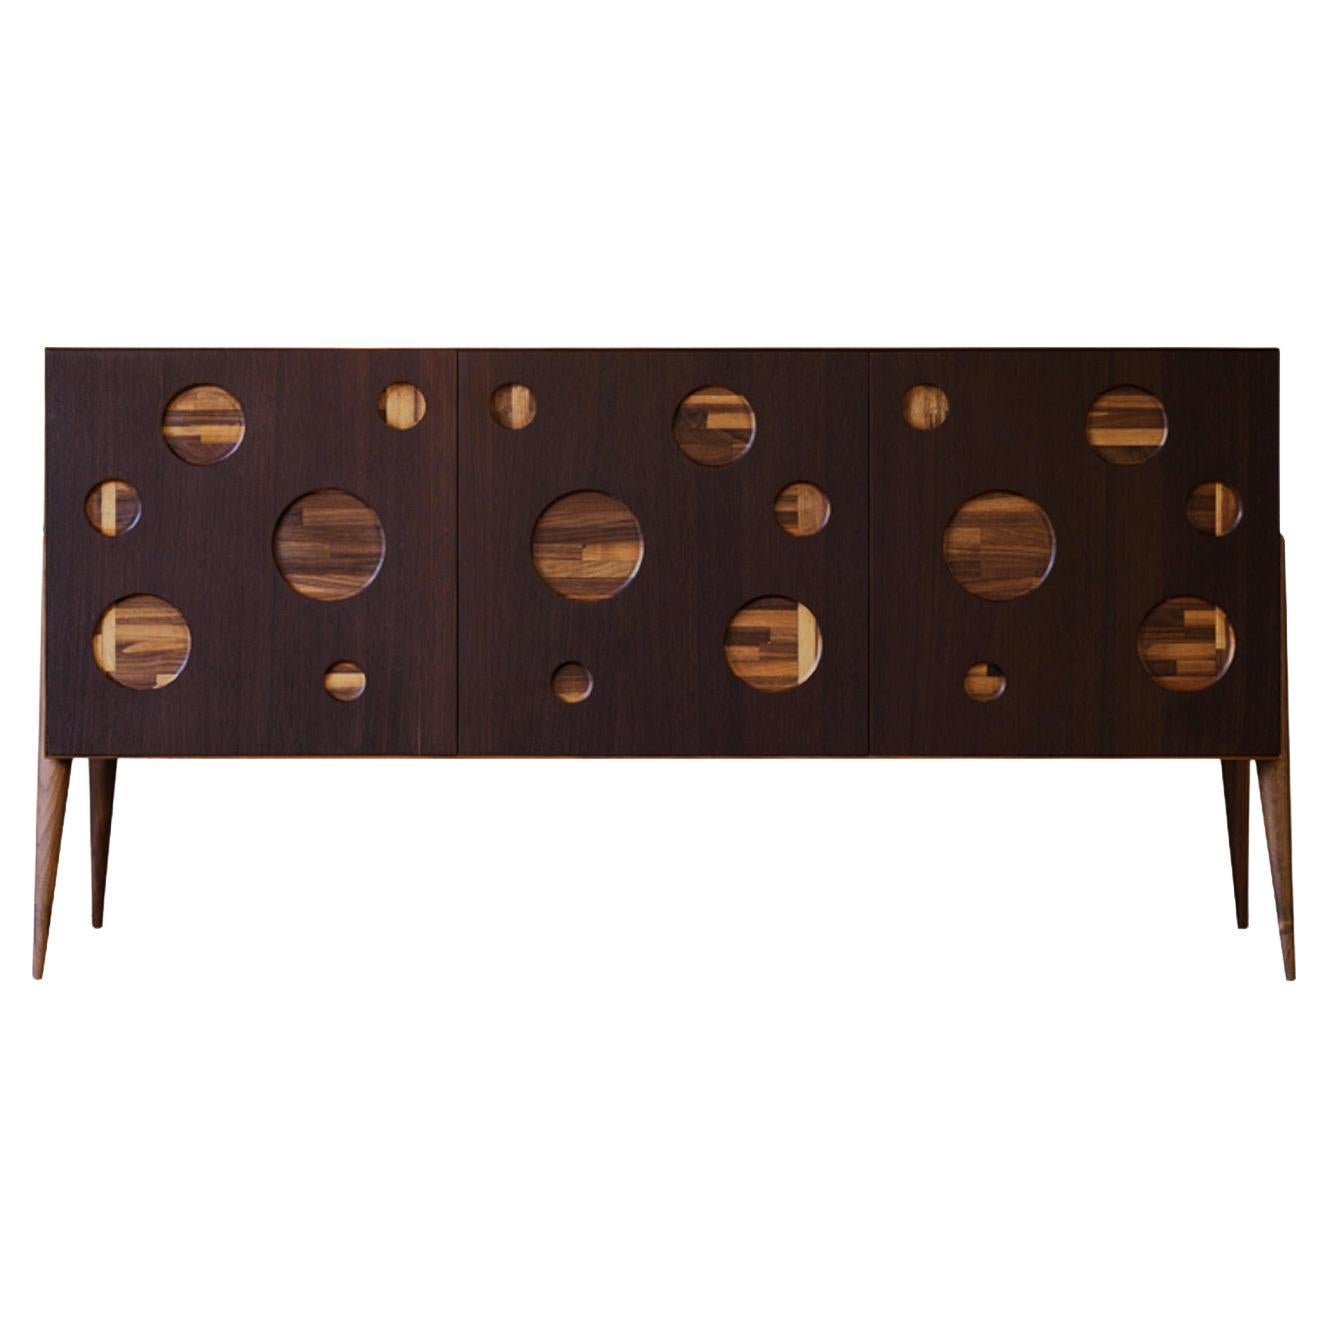 Lauta Cerchio Solid Wood Sideboard, Walnut in Natural Finish, Contemporary For Sale